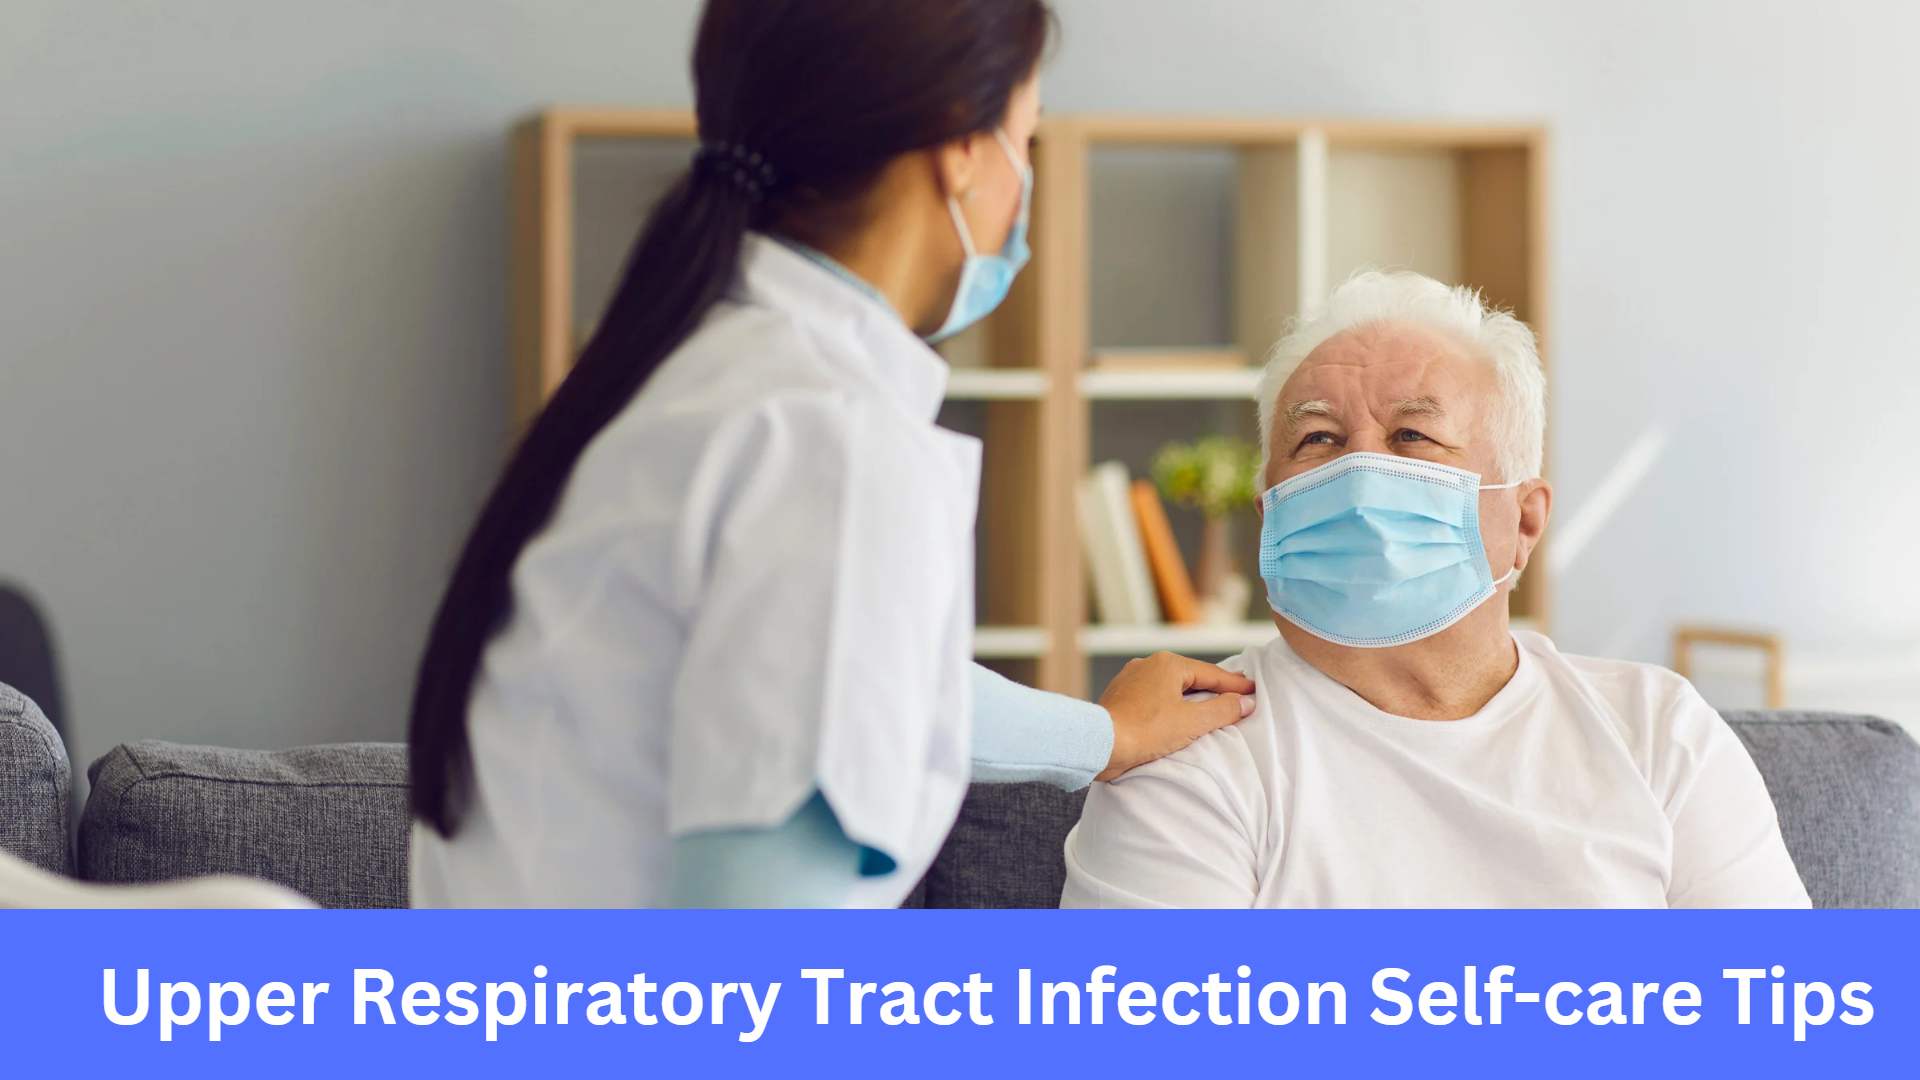 Upper Respiratory Tract Infection Self-care Tips